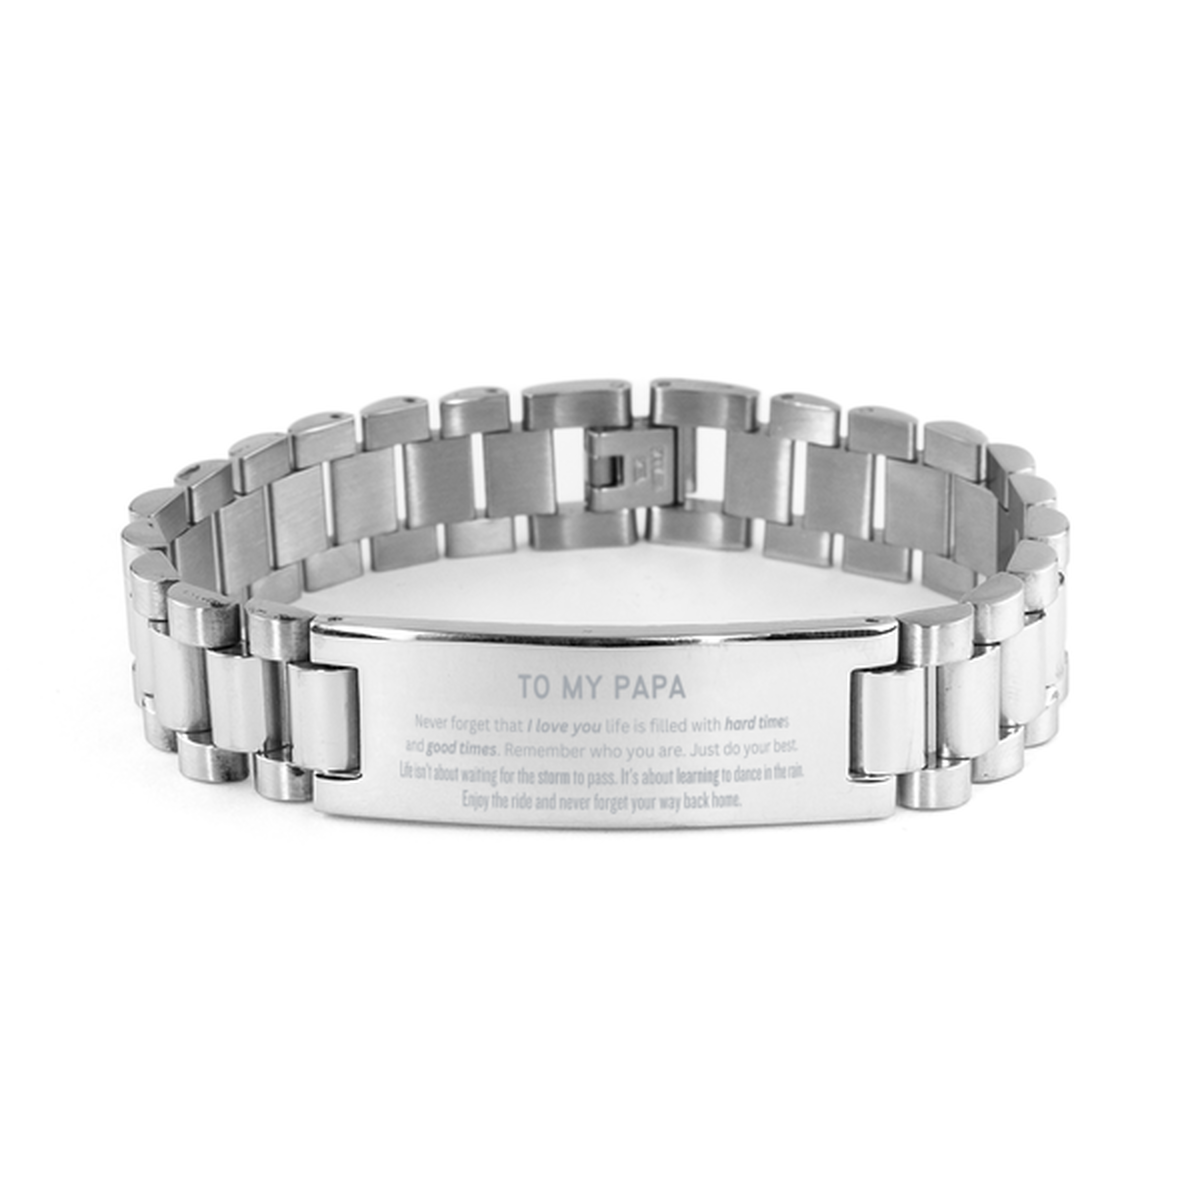 Christmas Papa Ladder Stainless Steel Bracelet Gifts, To My Papa Birthday Thank You Gifts For Papa, Graduation Unique Gifts For Papa To My Papa Never forget that I love you life is filled with hard times and good times. Remember who you are. Just do your